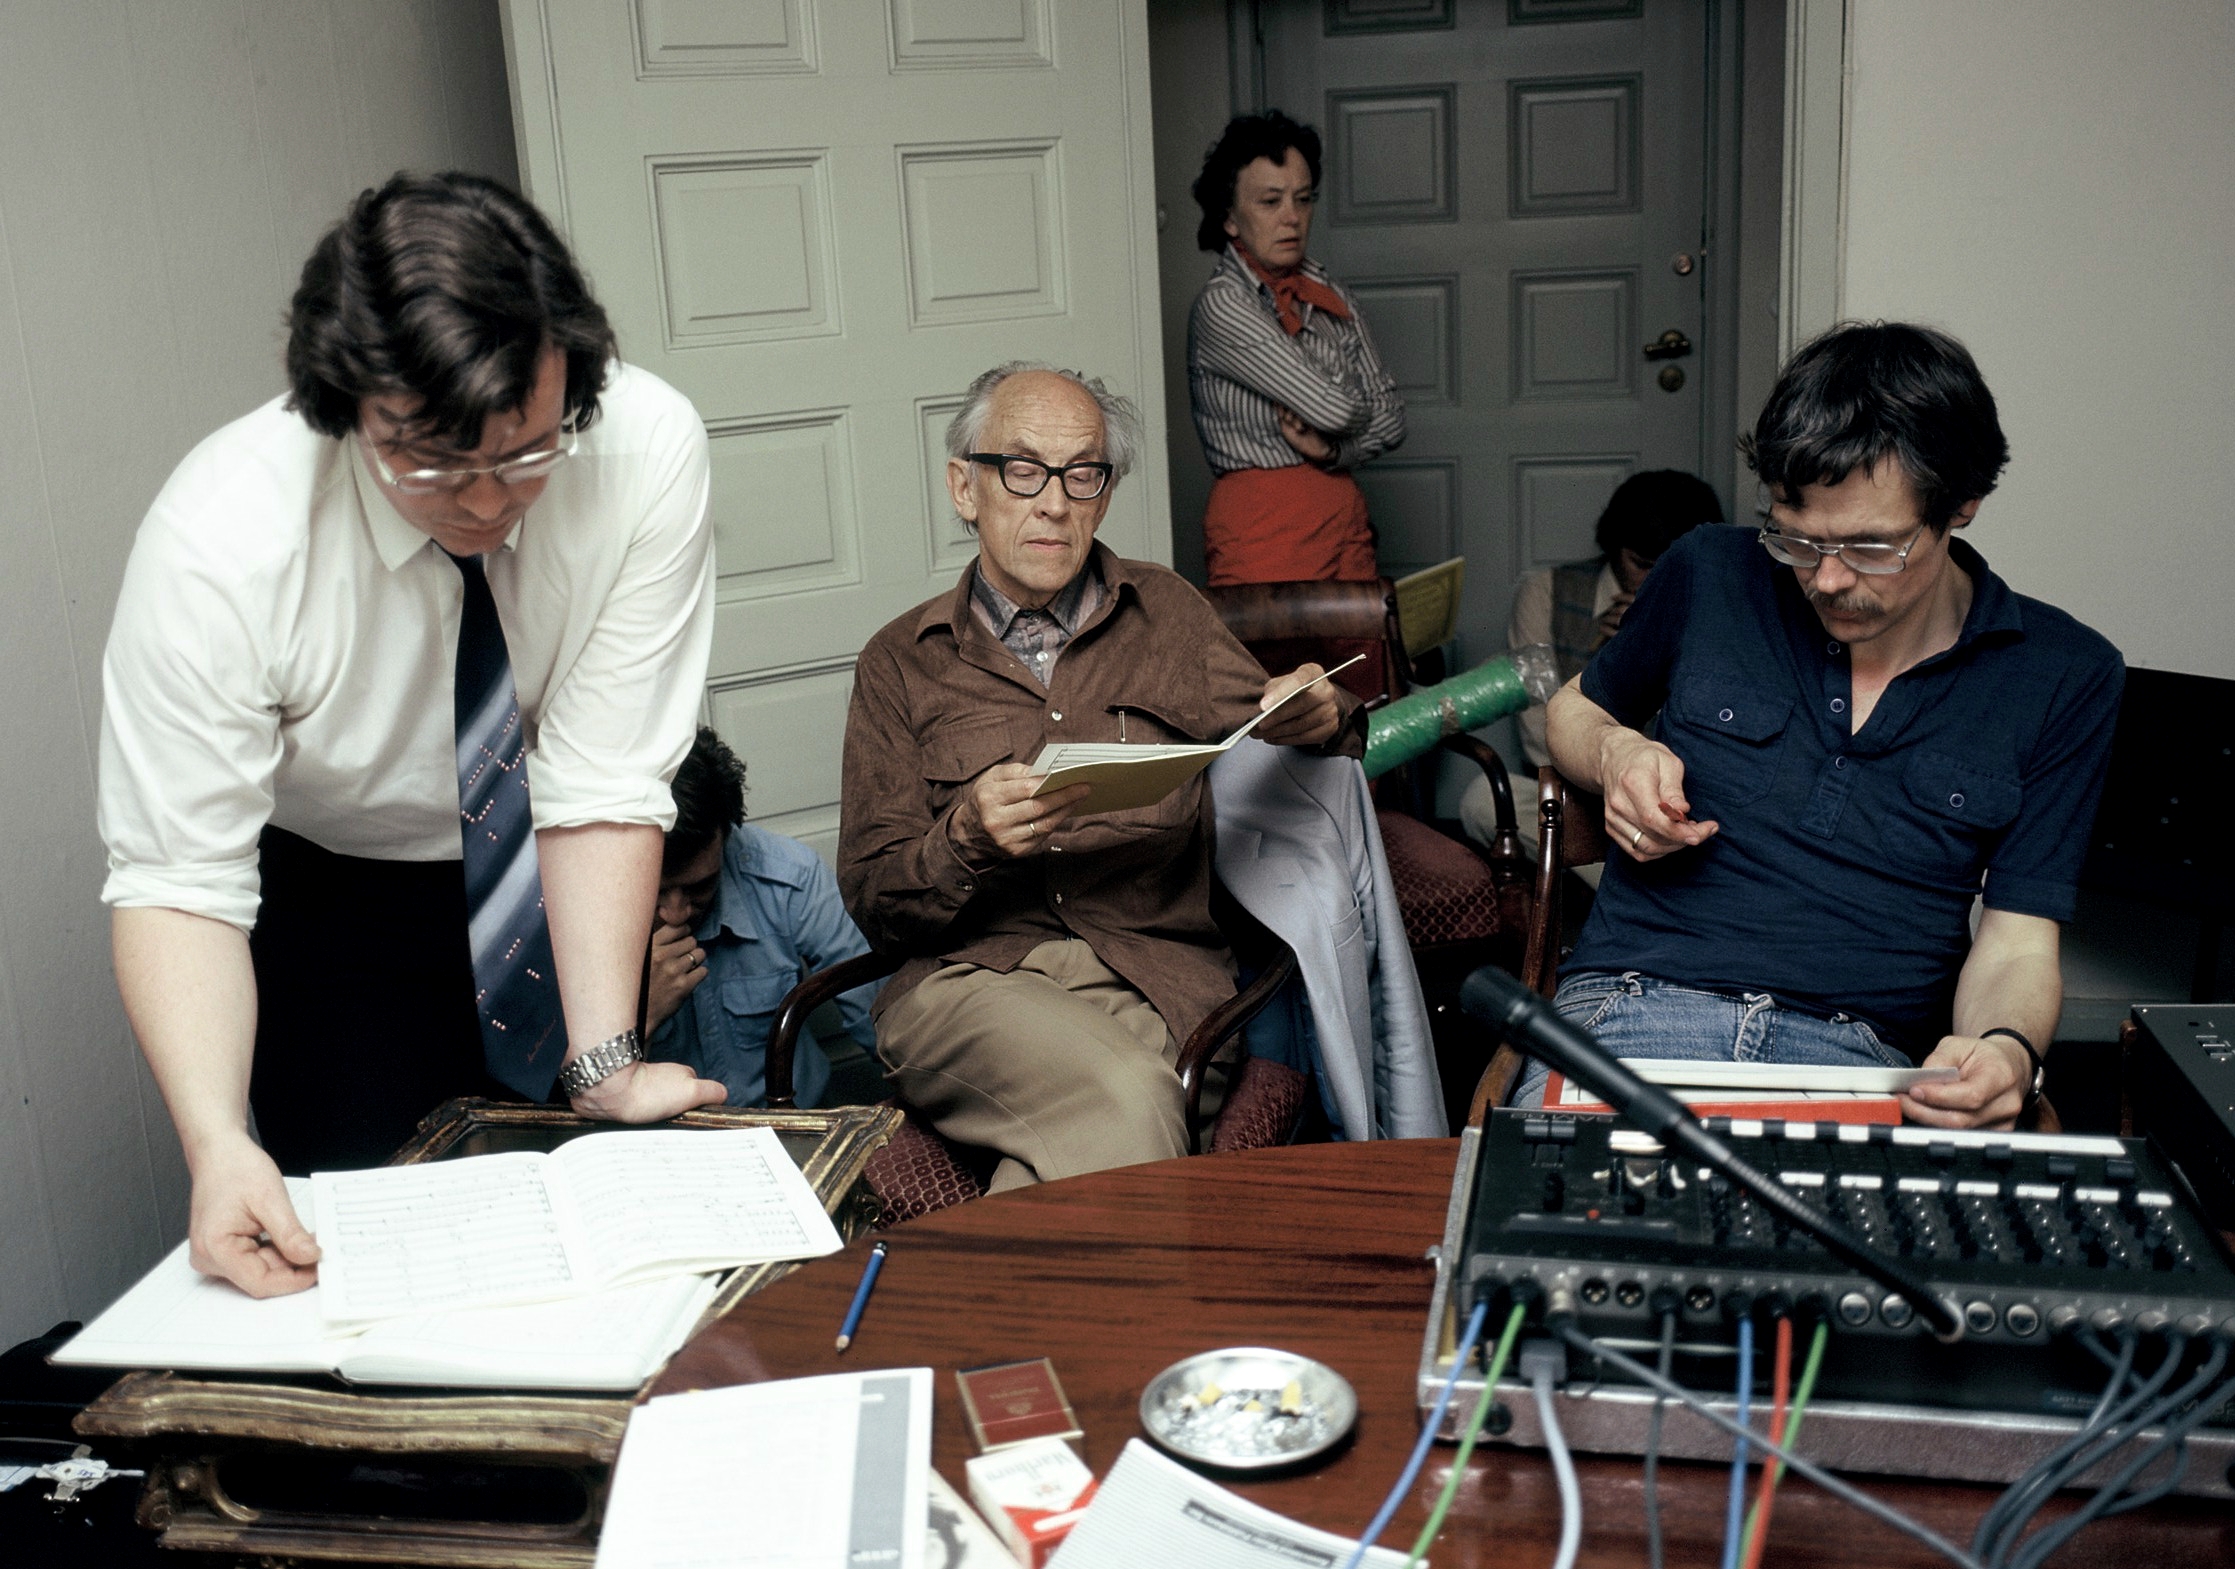 Picture of Knut Nystedt consulting during recordings.